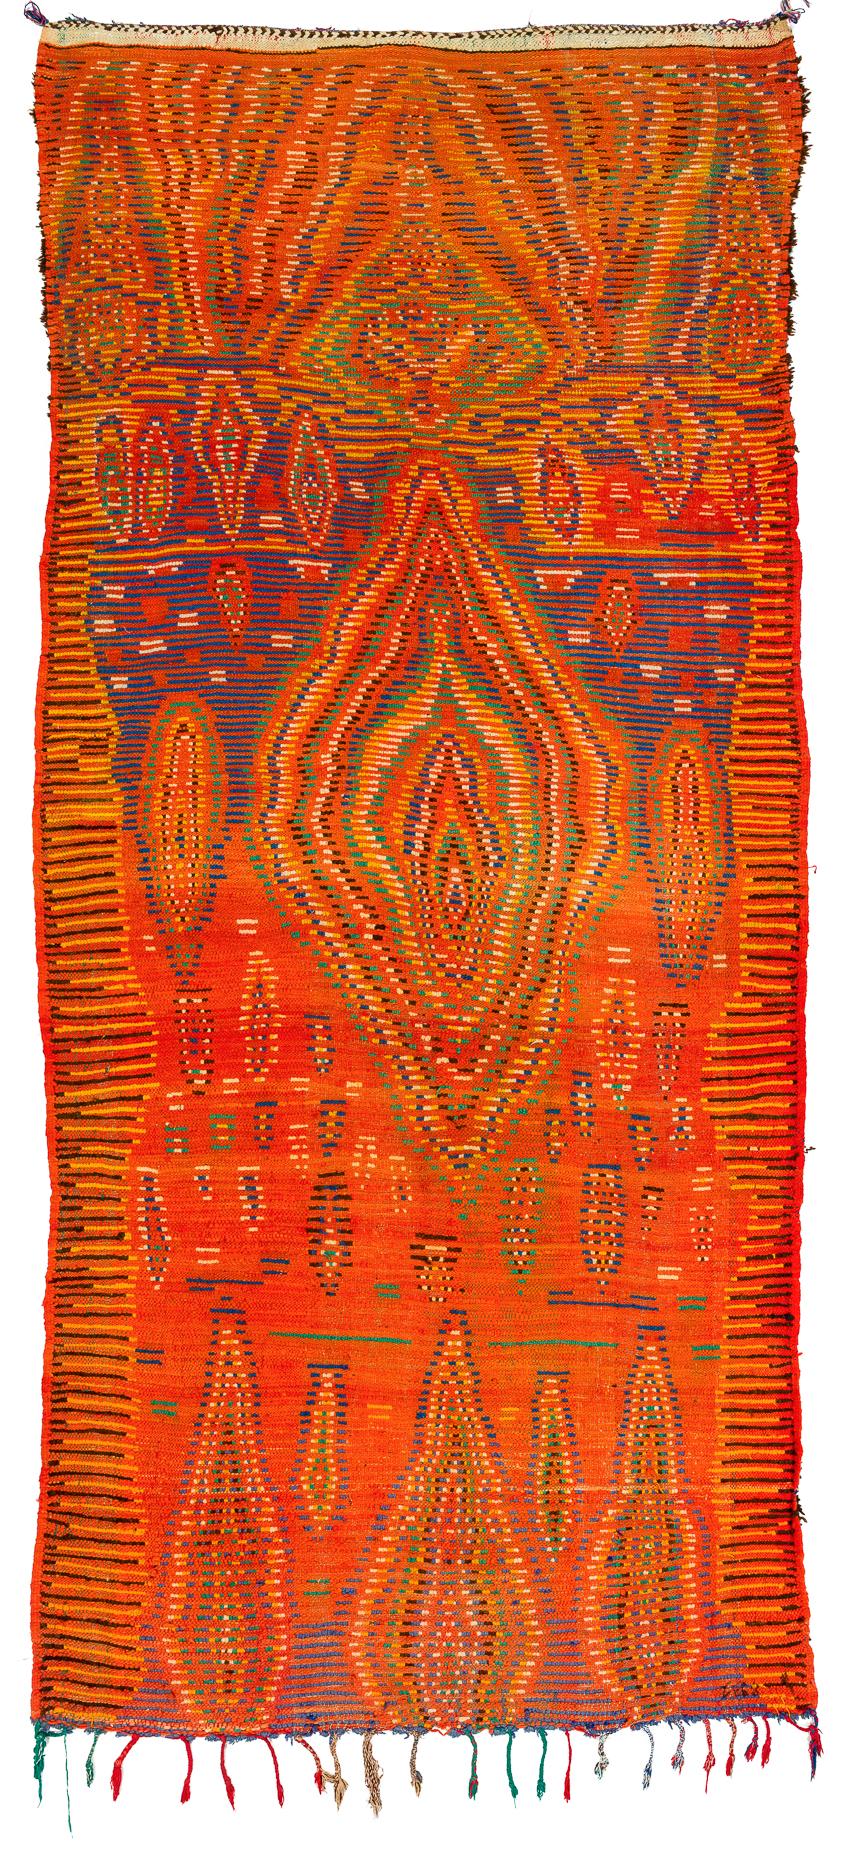 A dynamic and primitive rug from Morocco, probably woven the 1970s. We have not seen another one like it, a true example of art for the floor. Measures: 5'2” x 11' 7”.